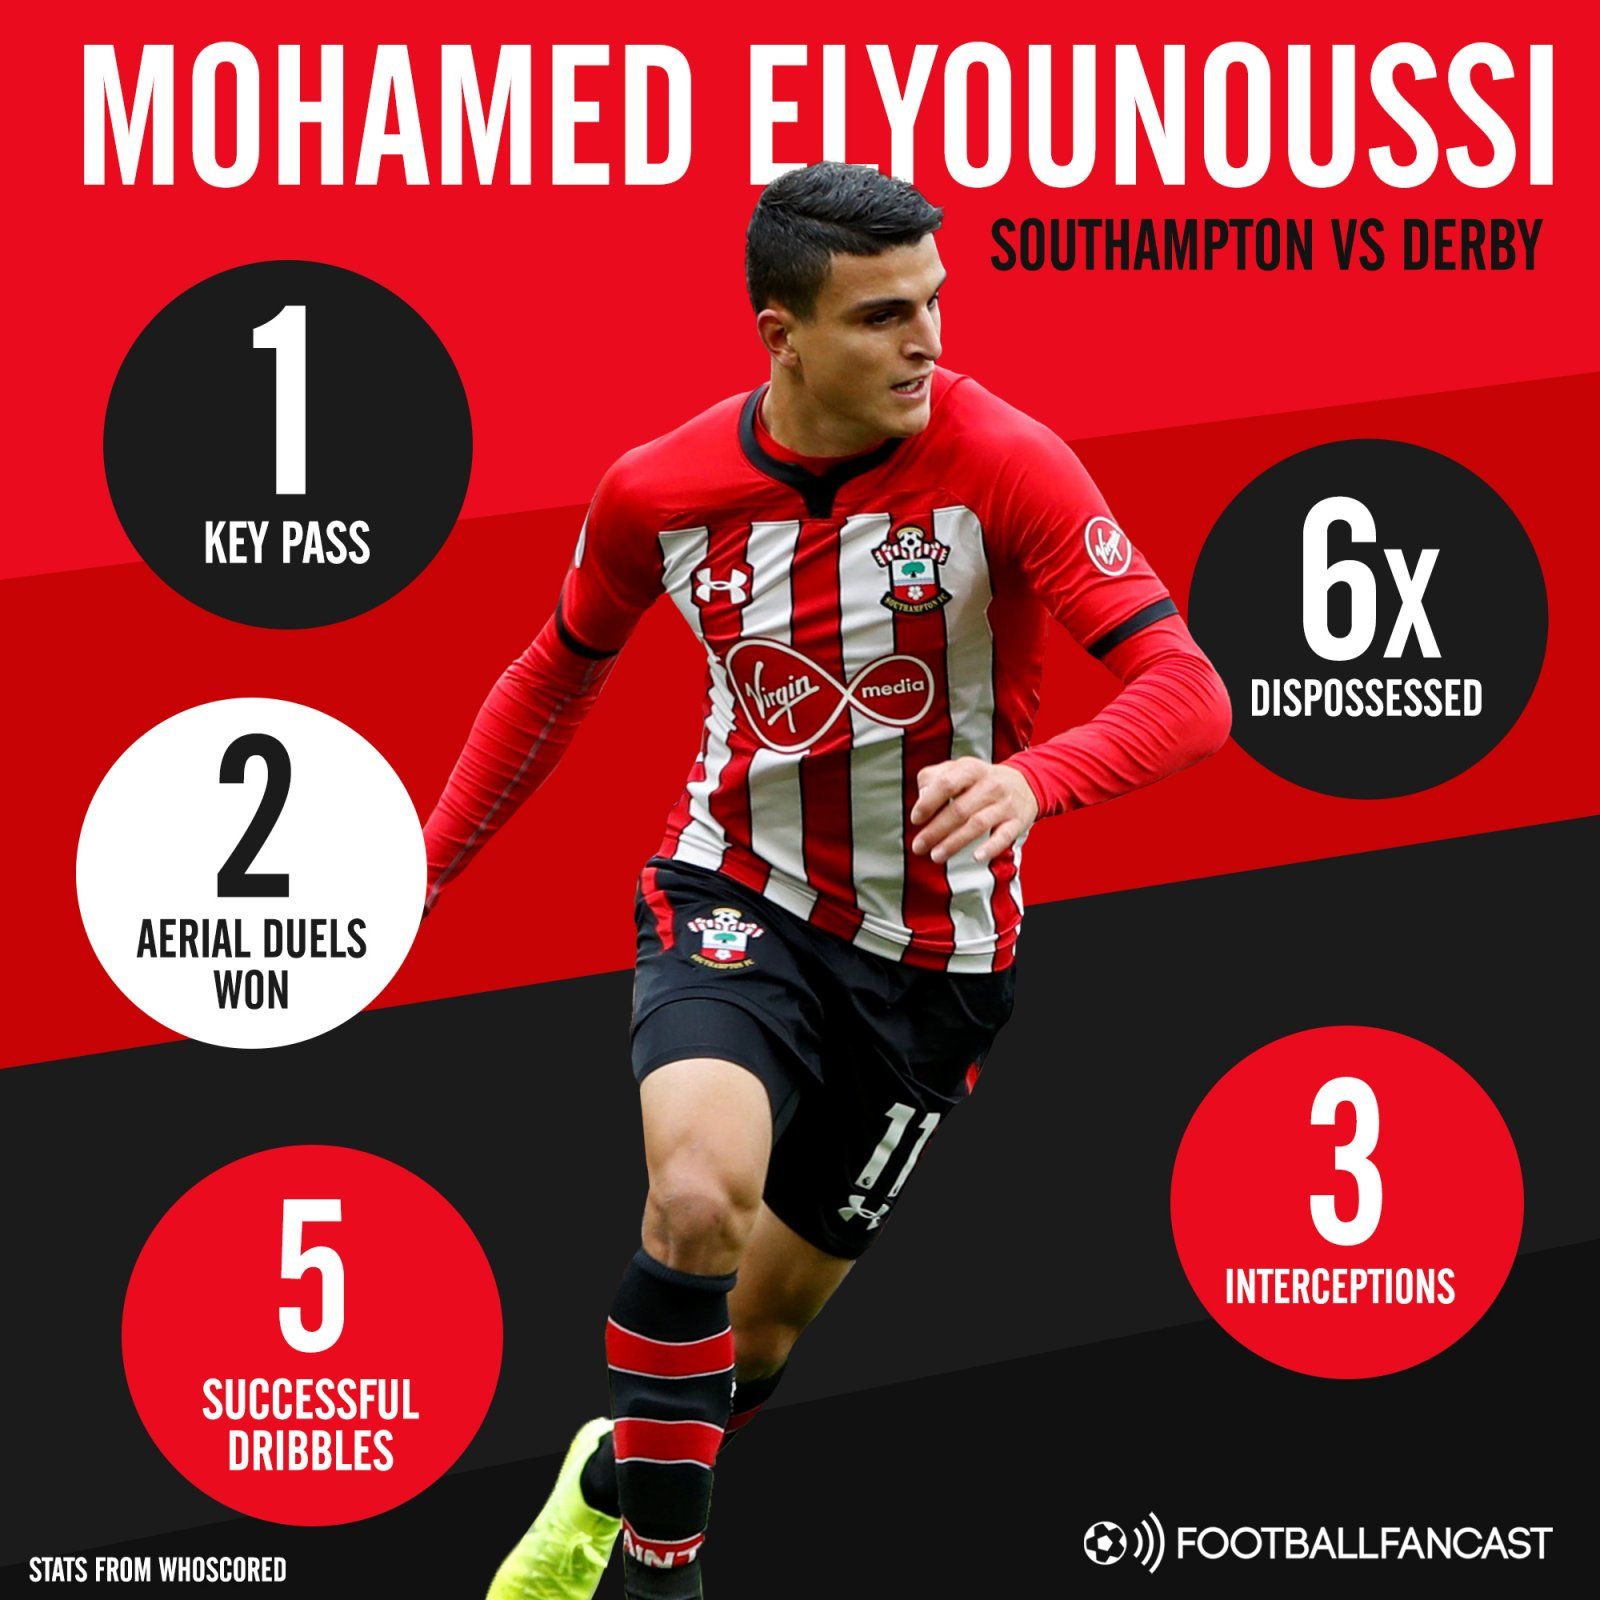 Southampton attacker Mohamed Elyounoussi's stats vs Derby County